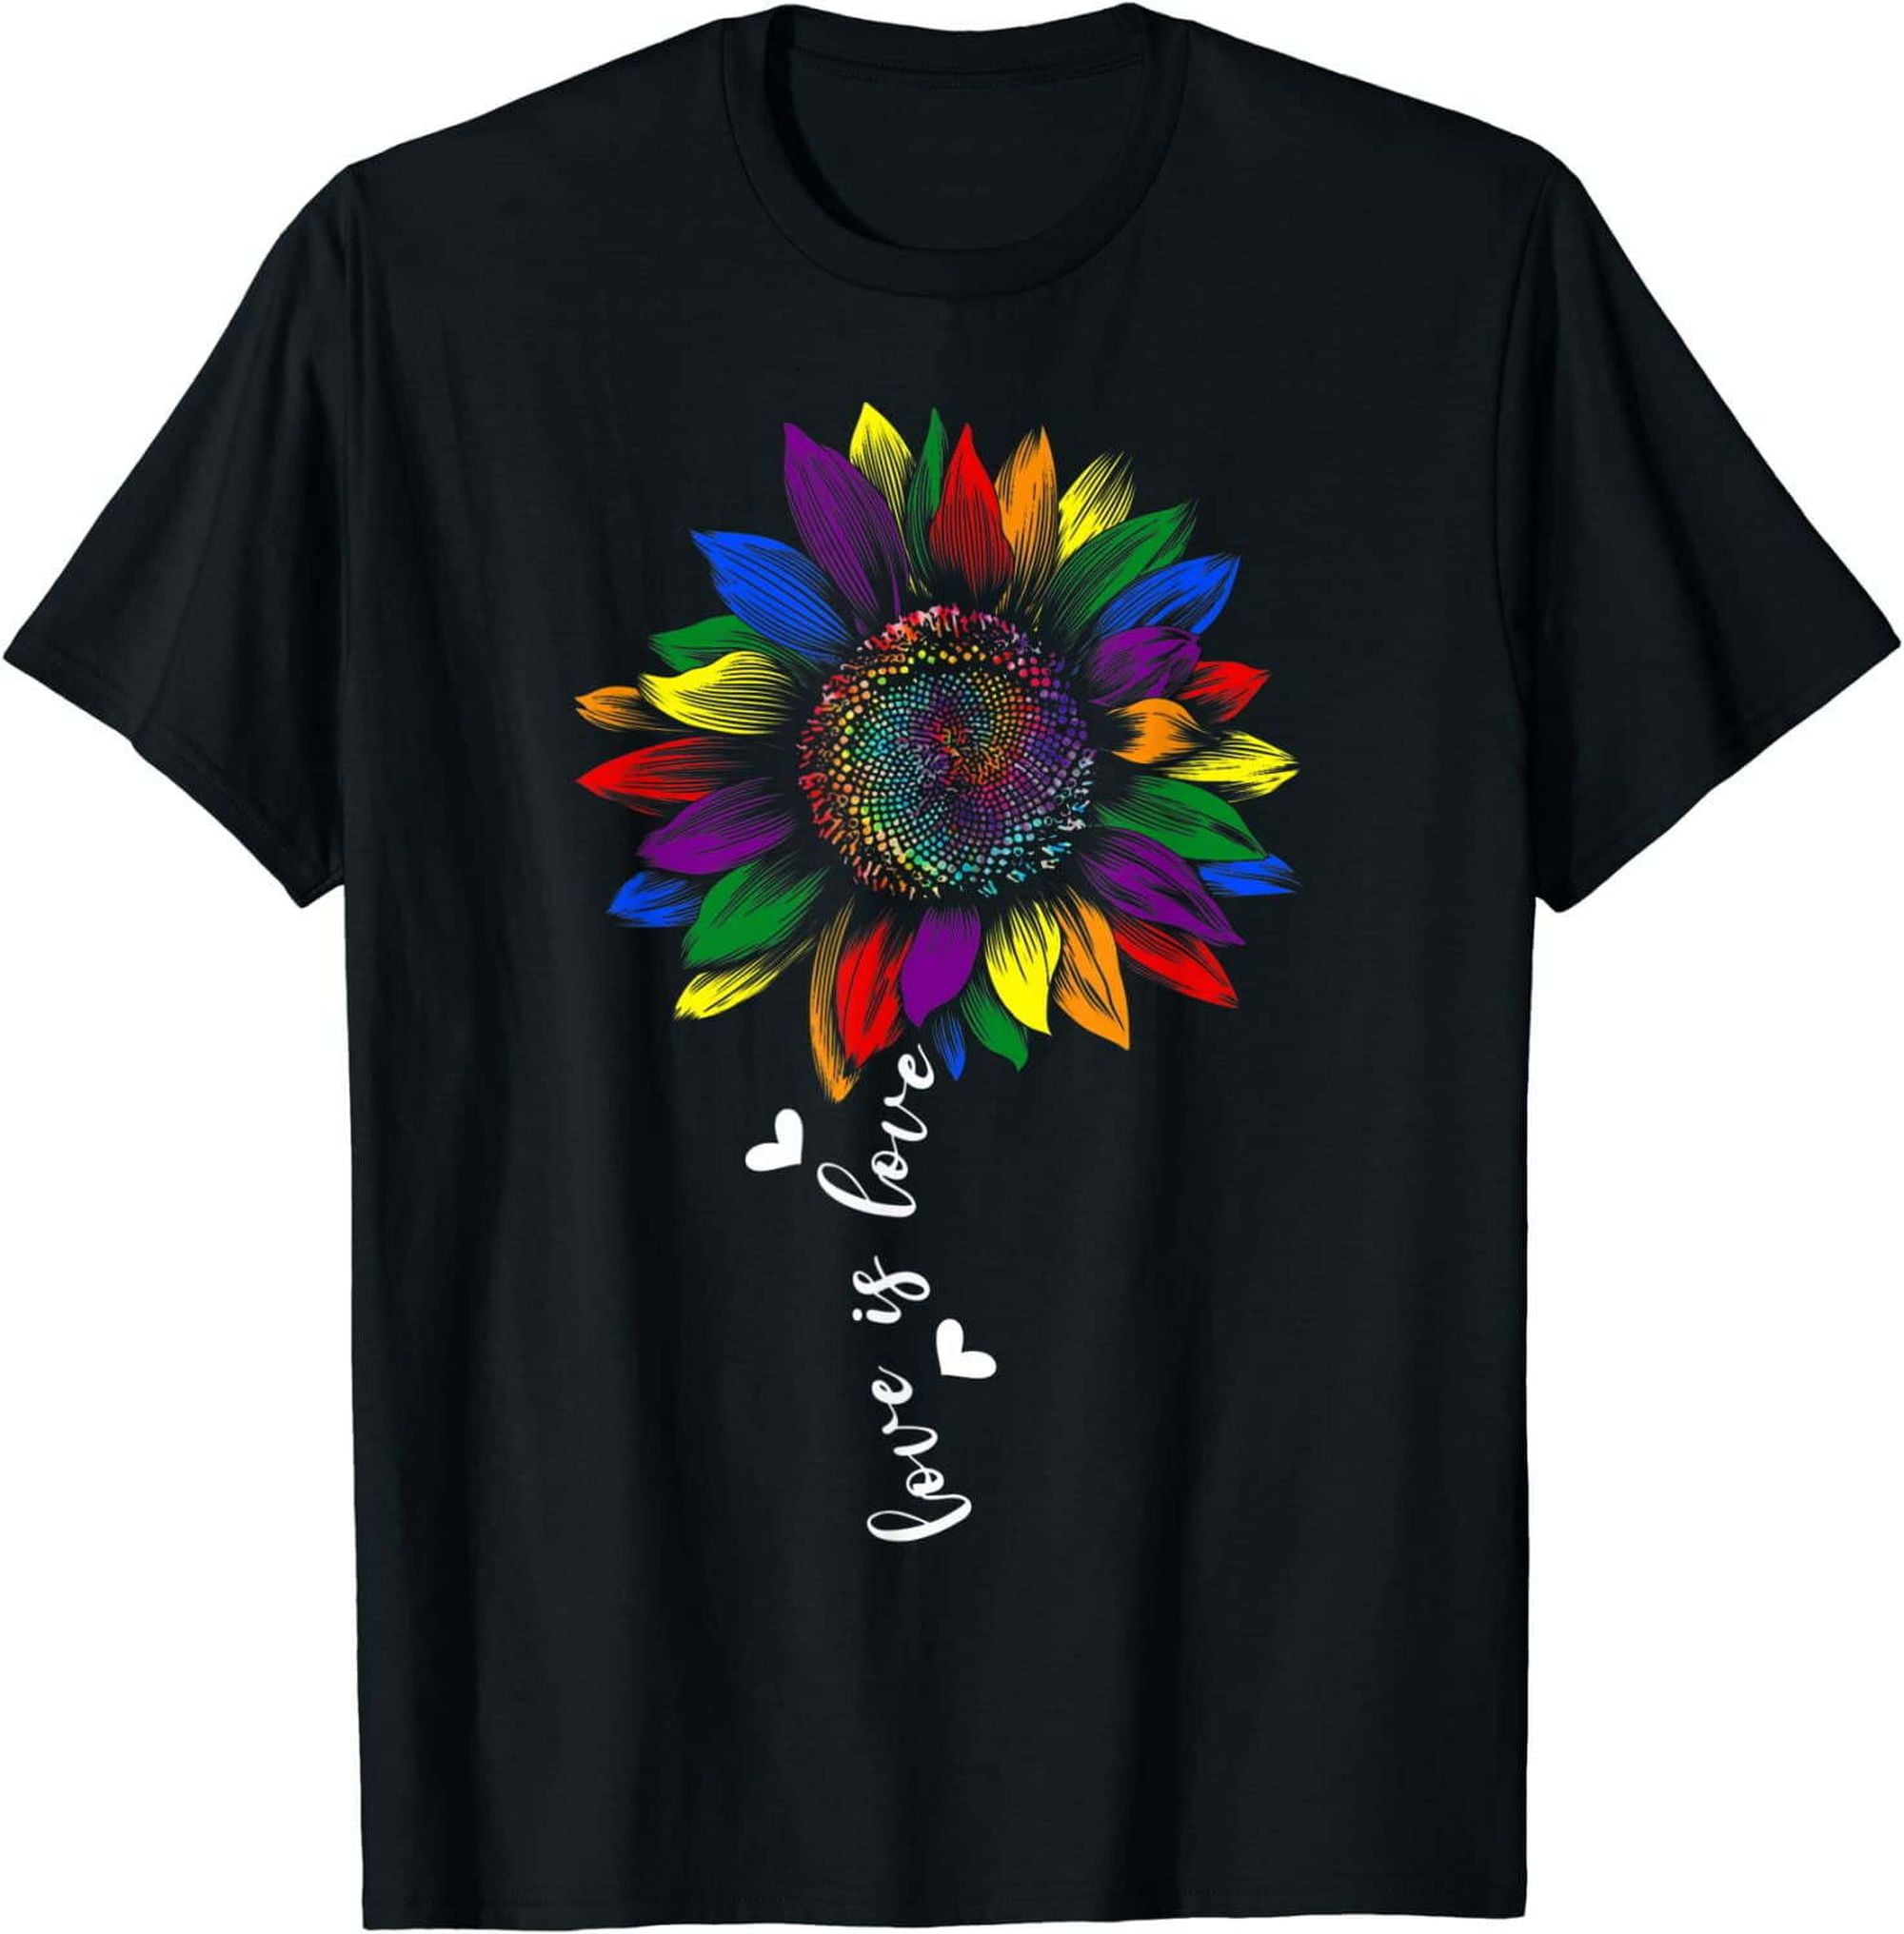 Express Your Love and Pride with our Vibrant LGBTQ+ Sunflower T-Shirt ...